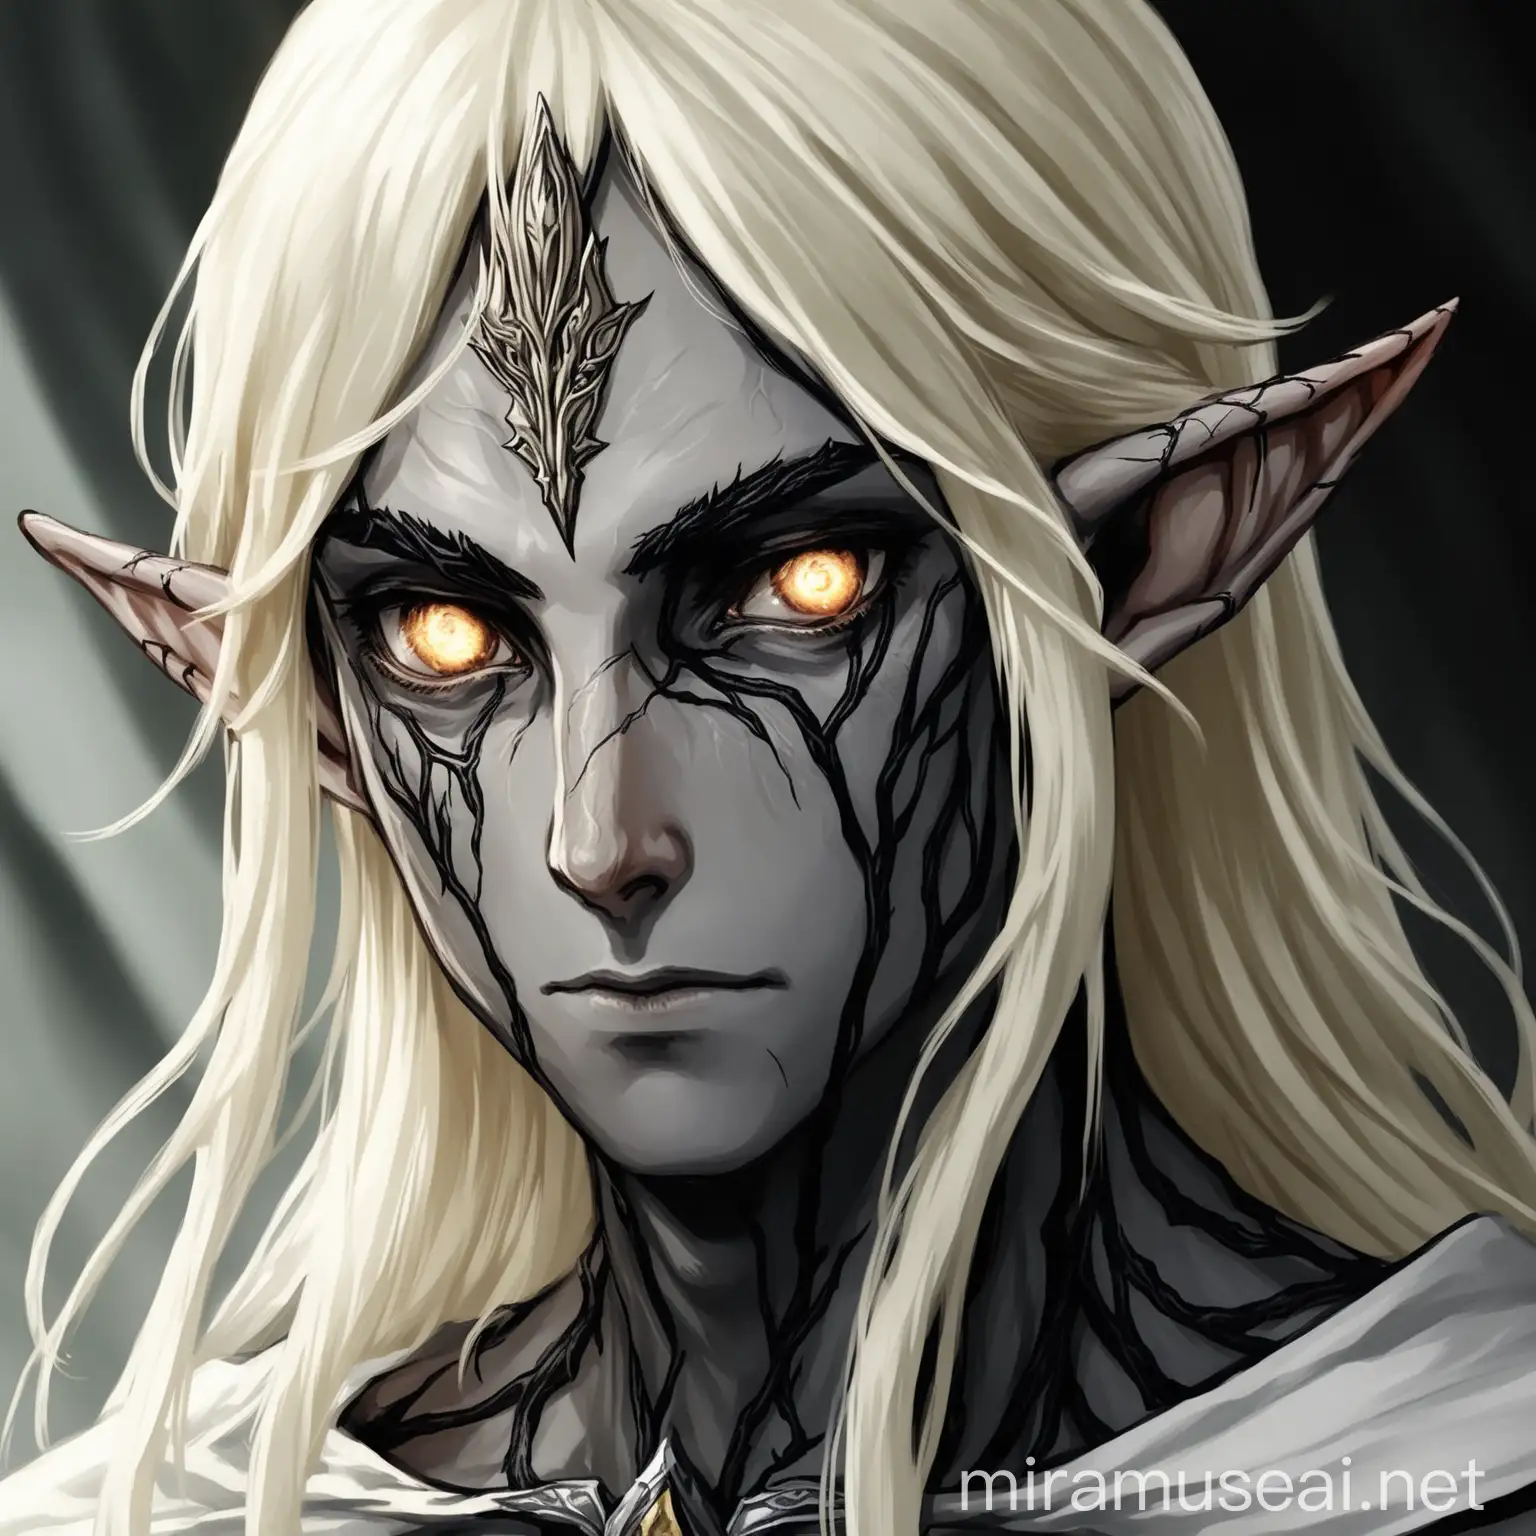 Mysterious Elf with Bleach Blond Hair and Veiny Features